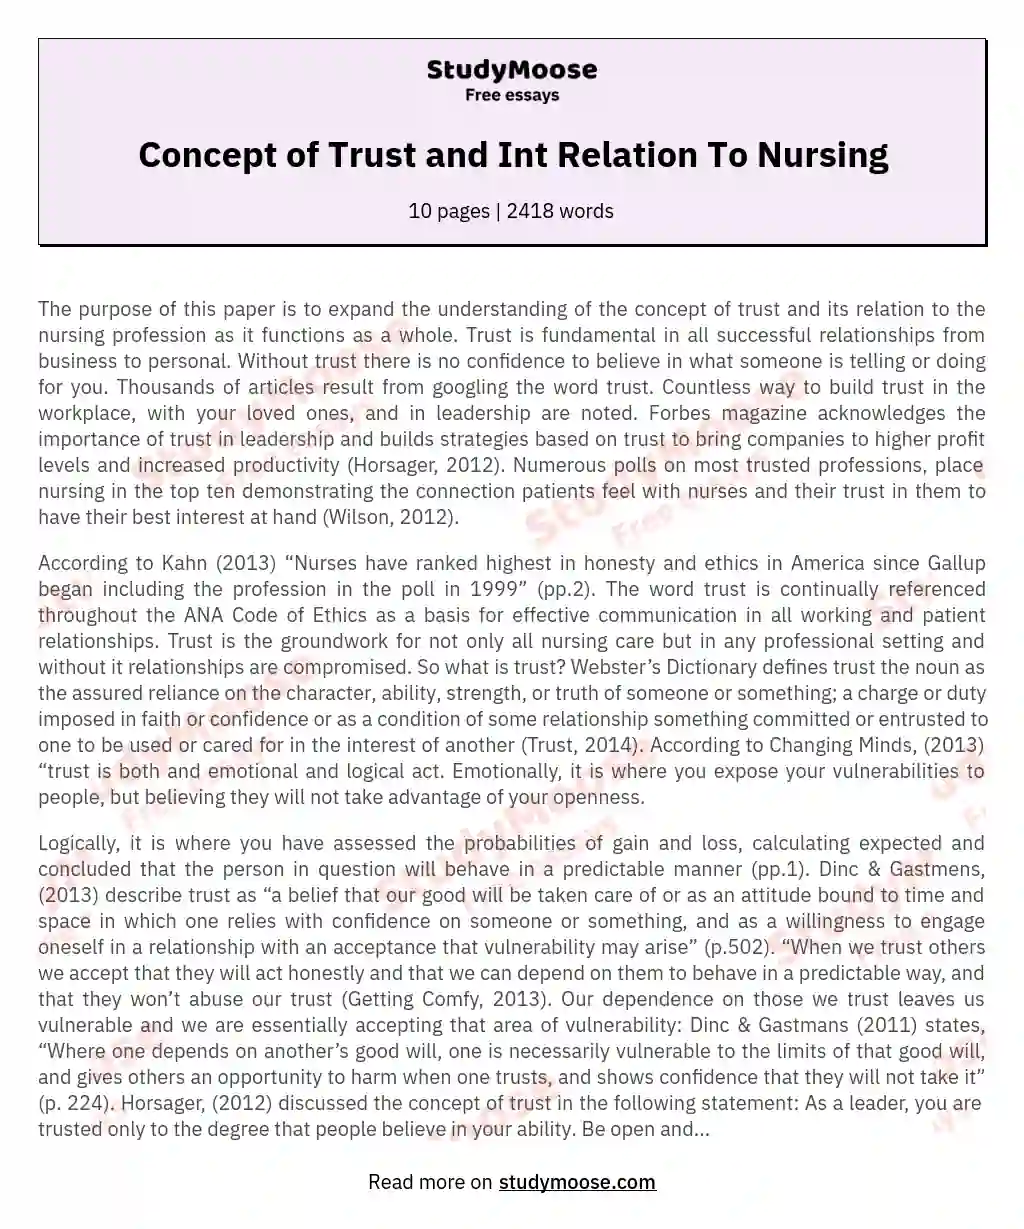 Concept of Trust and Int Relation To Nursing essay